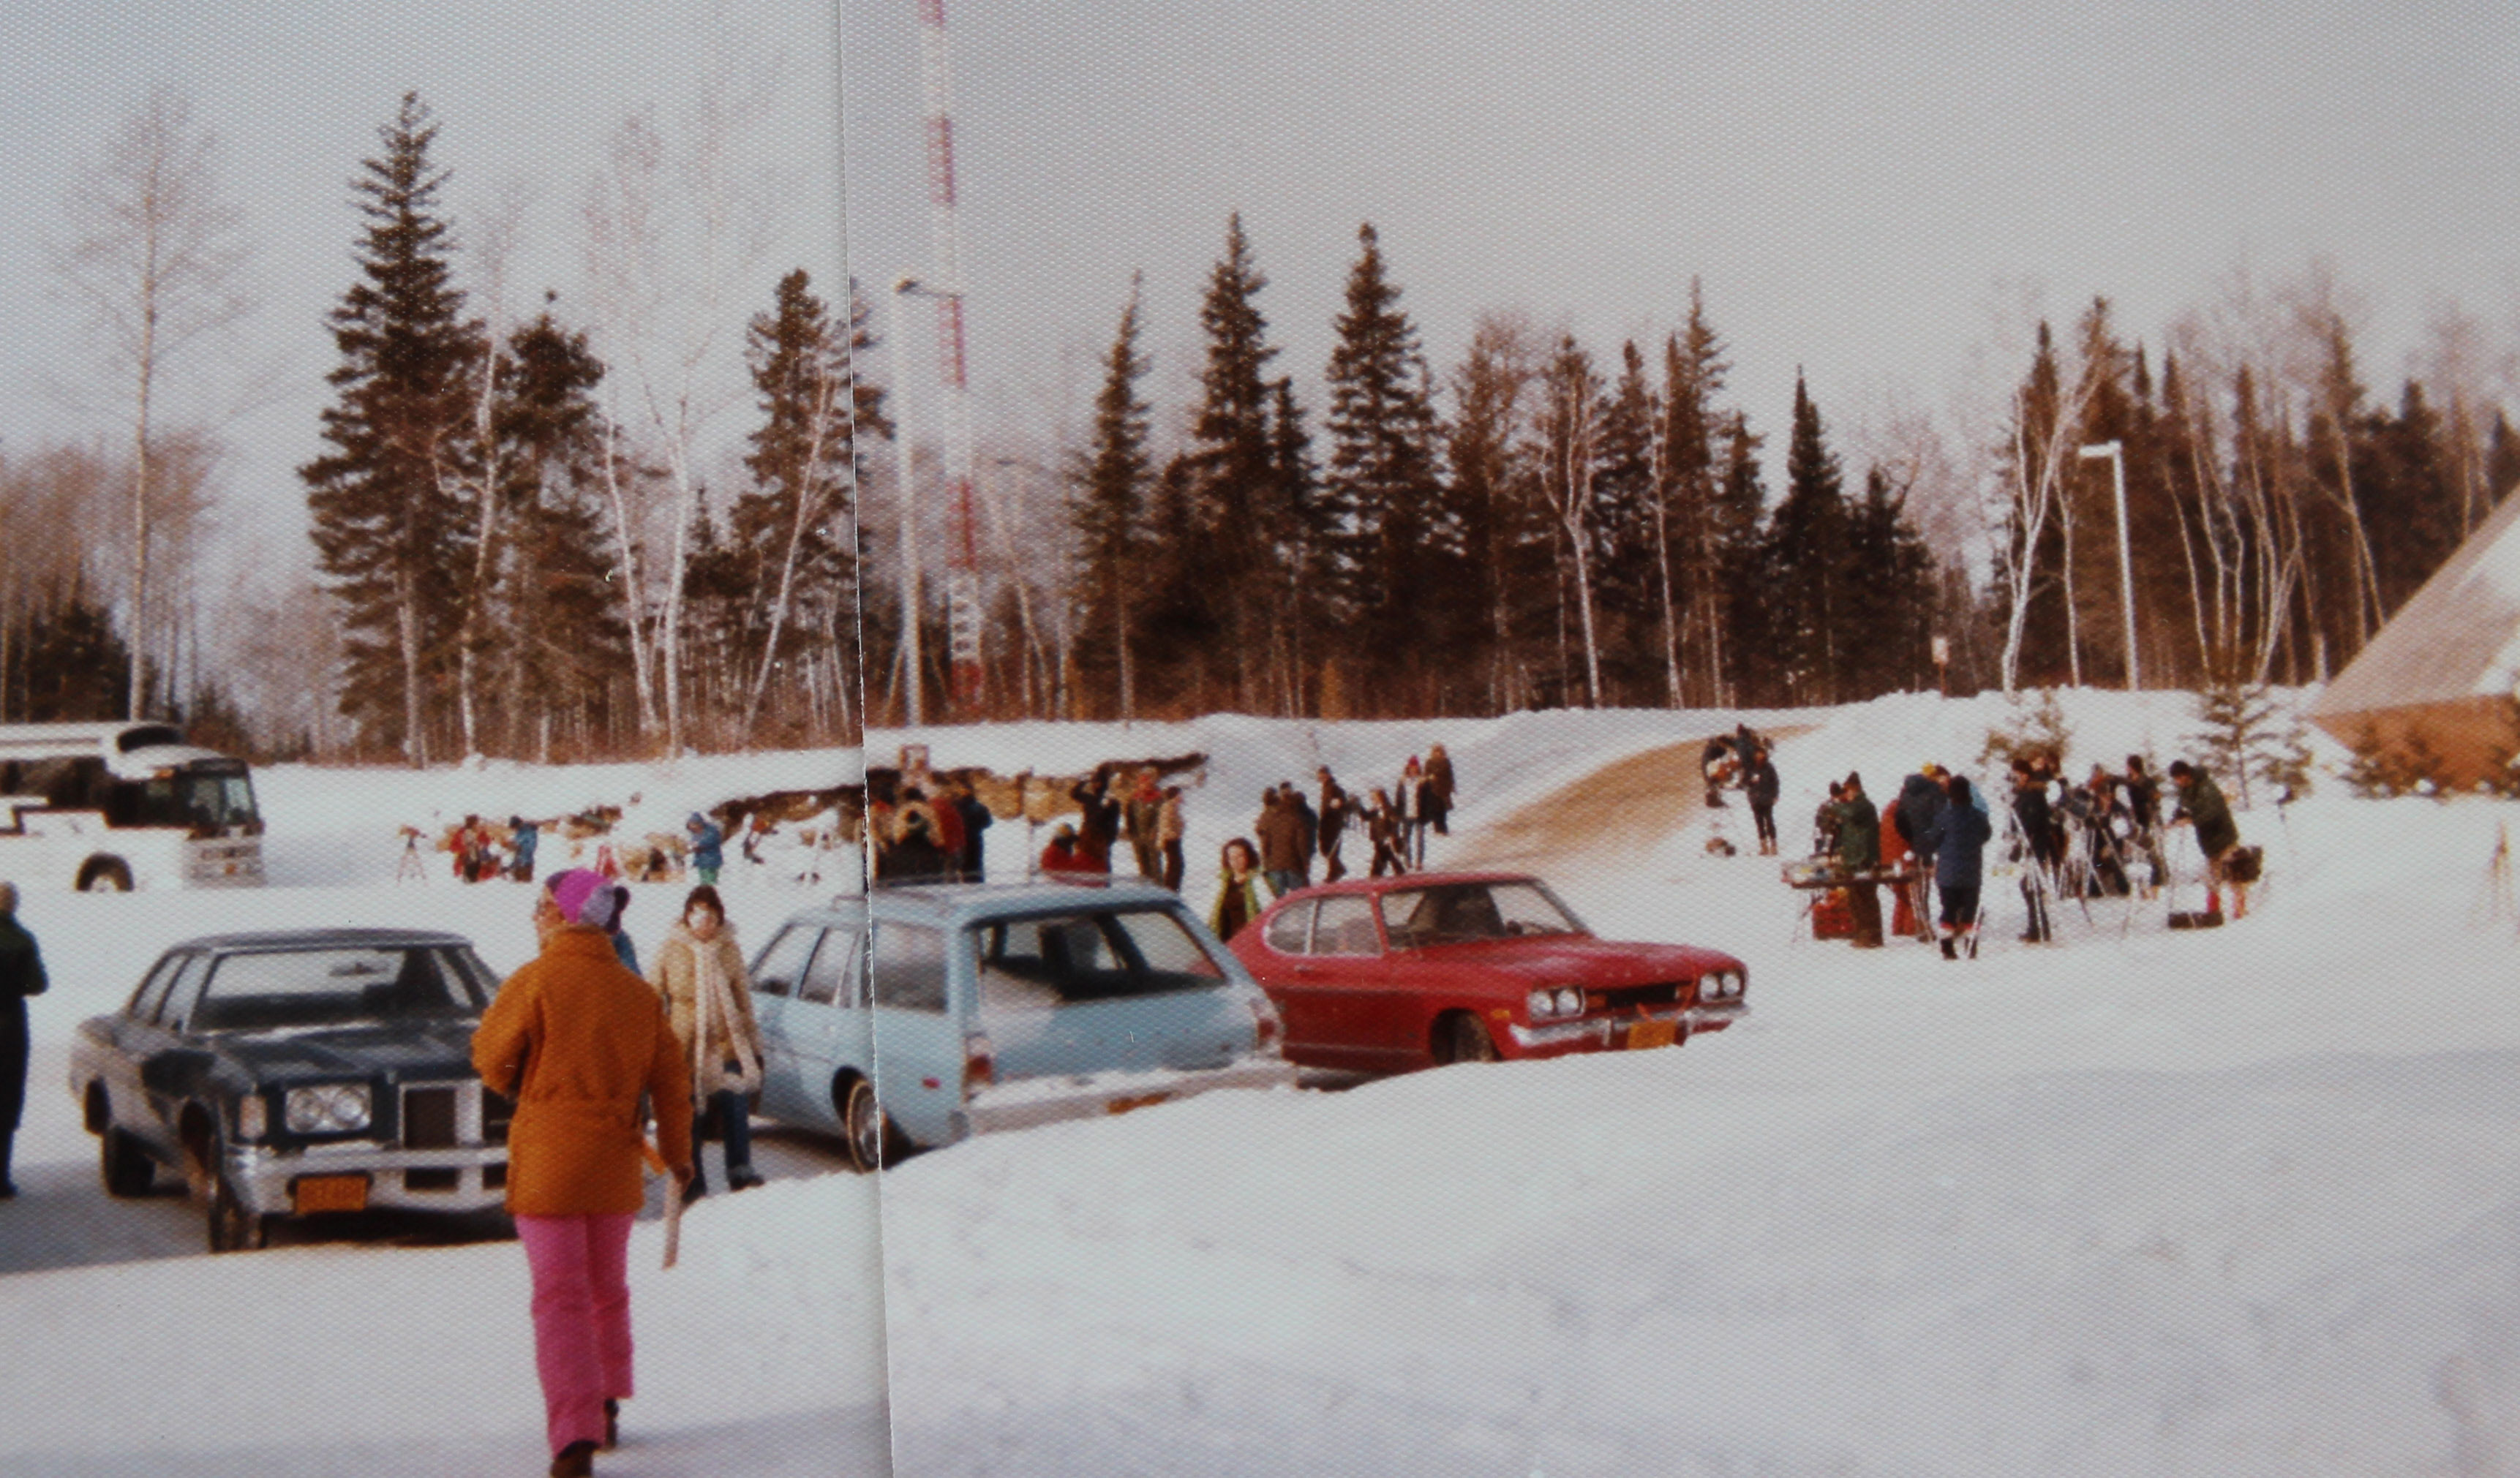 Busloads of eclipse chasers arrived at Hecla Island the morning of the 1979 solar eclipse.